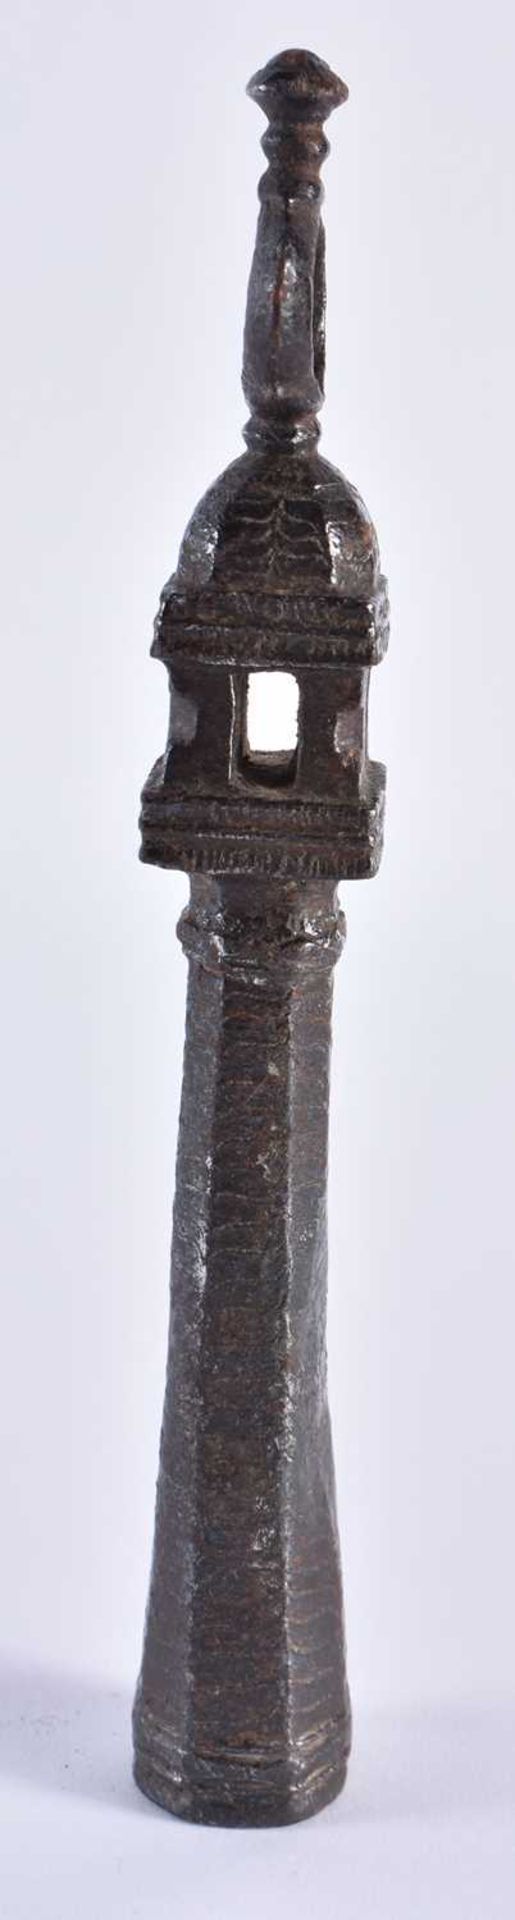 AN 18TH CENTURY MIDDLE EASTERN ISLAMIC IRON TURKISH SCULPTURE formed as a column. 18 cm high. - Image 3 of 5